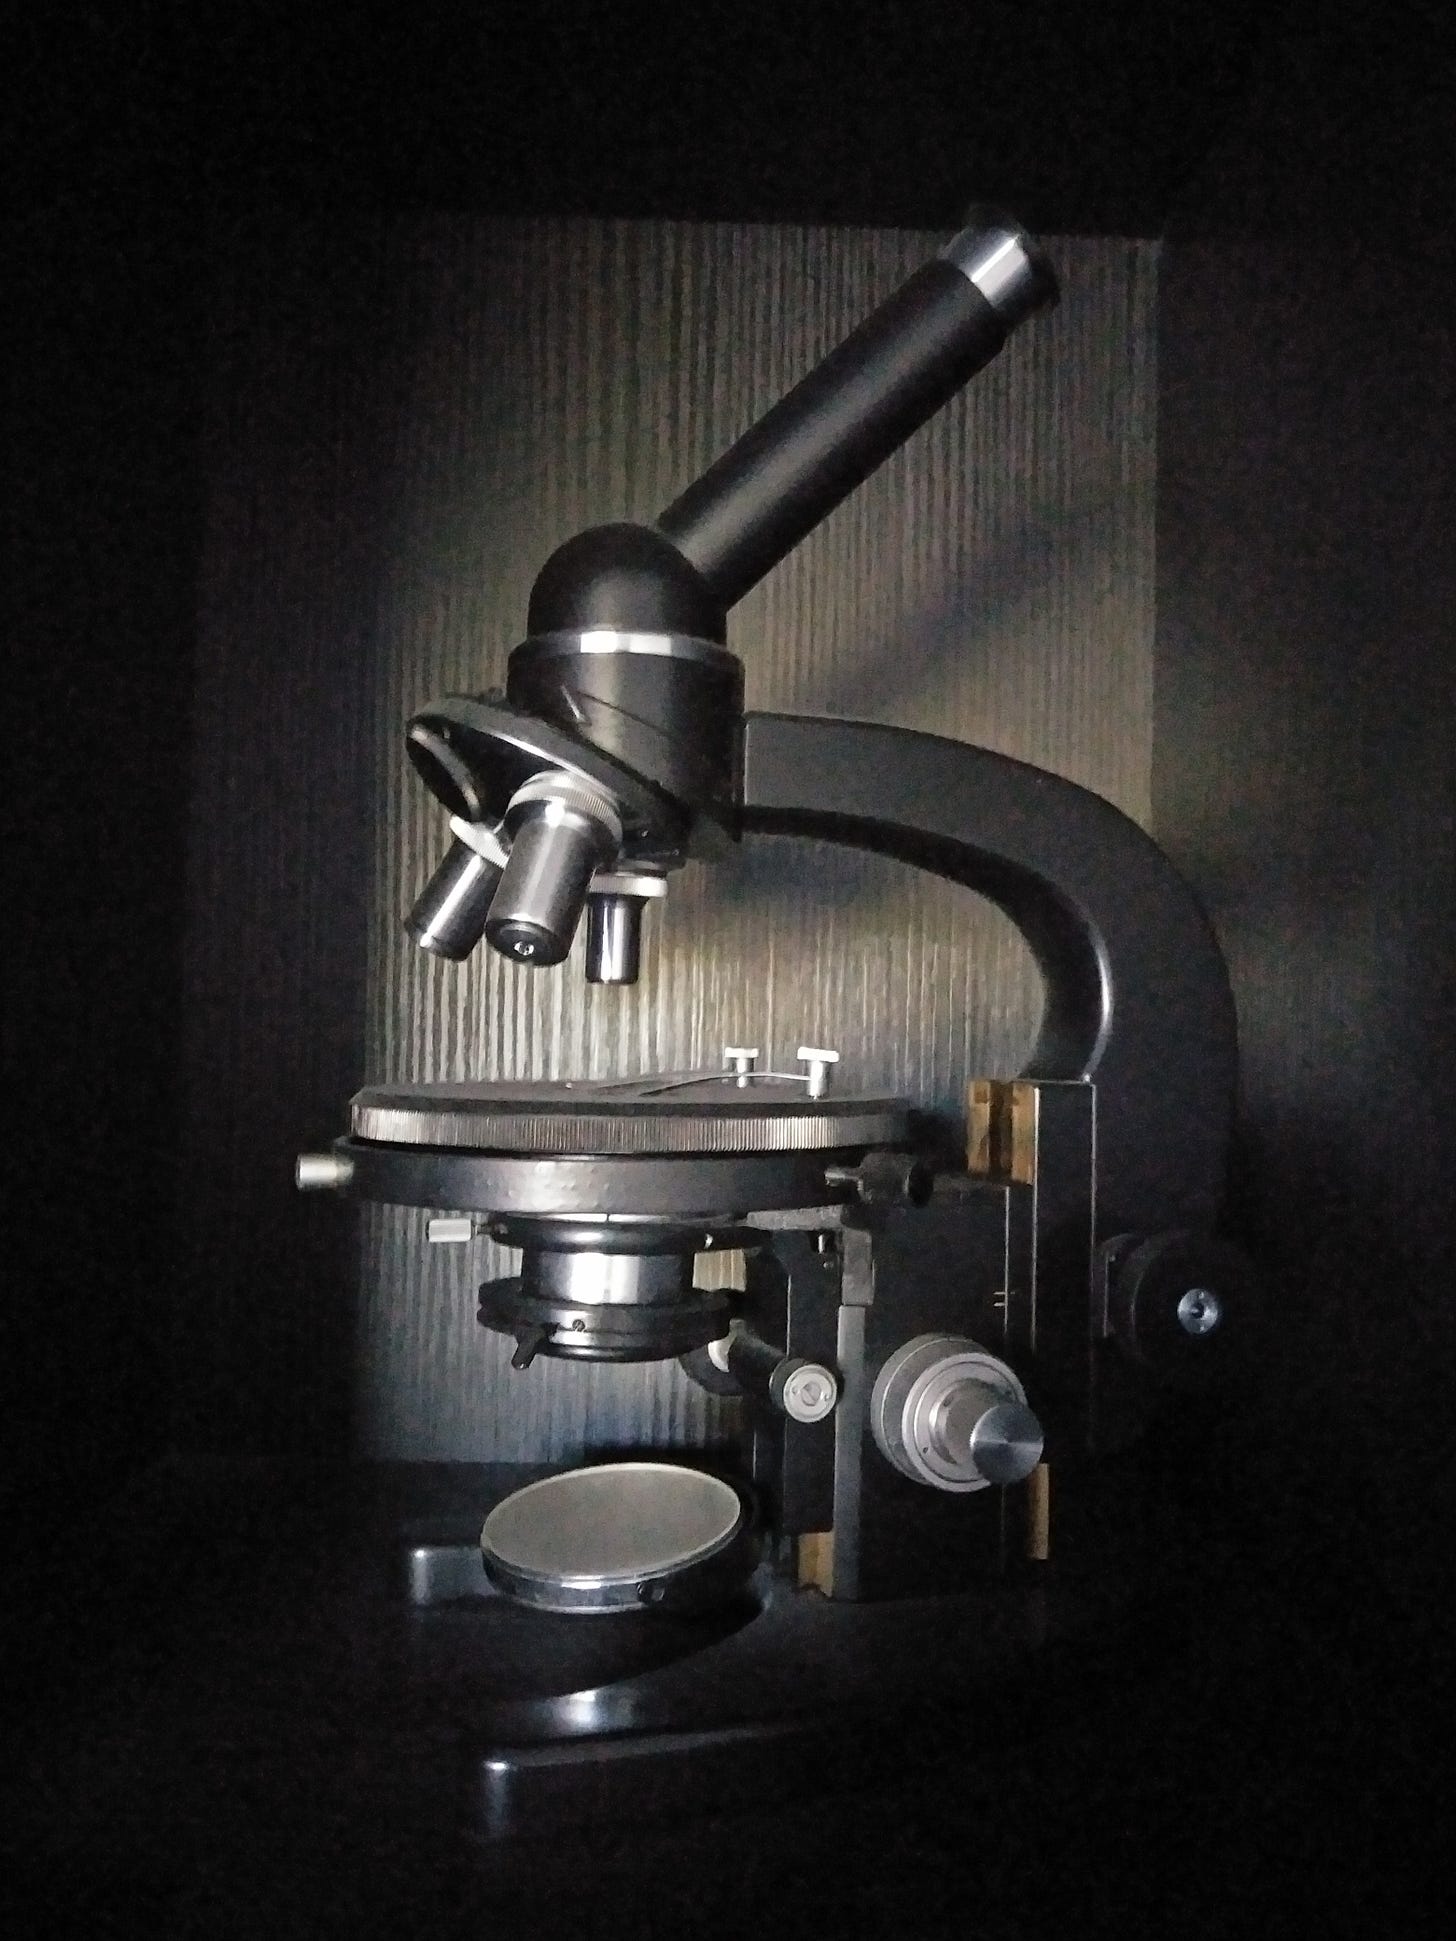 Microscope with mirror